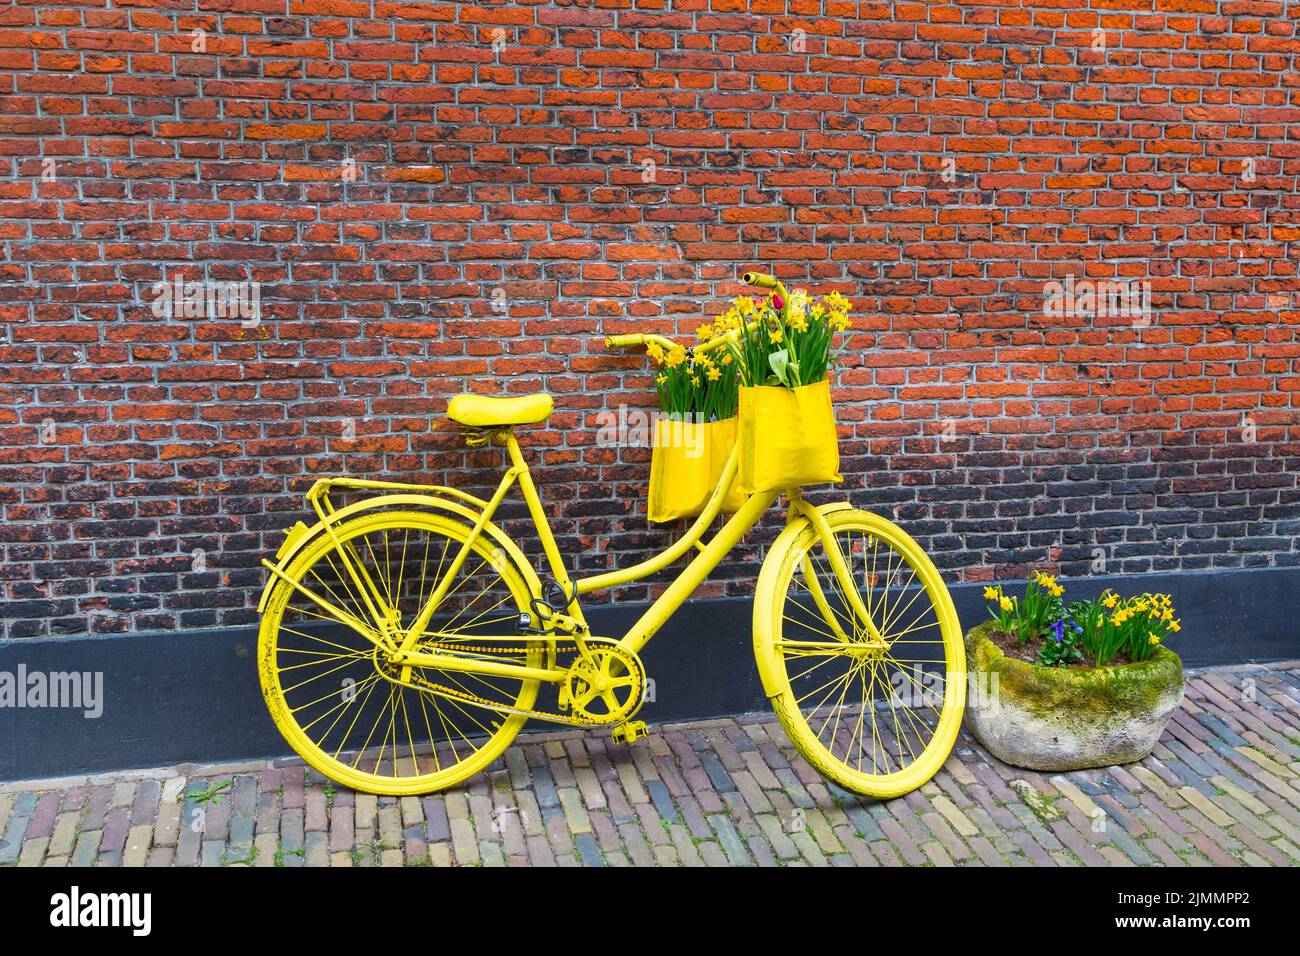 Vibrant yellow bicycle with basket of daffodil flowers on rustic brick wall background Stock Photo